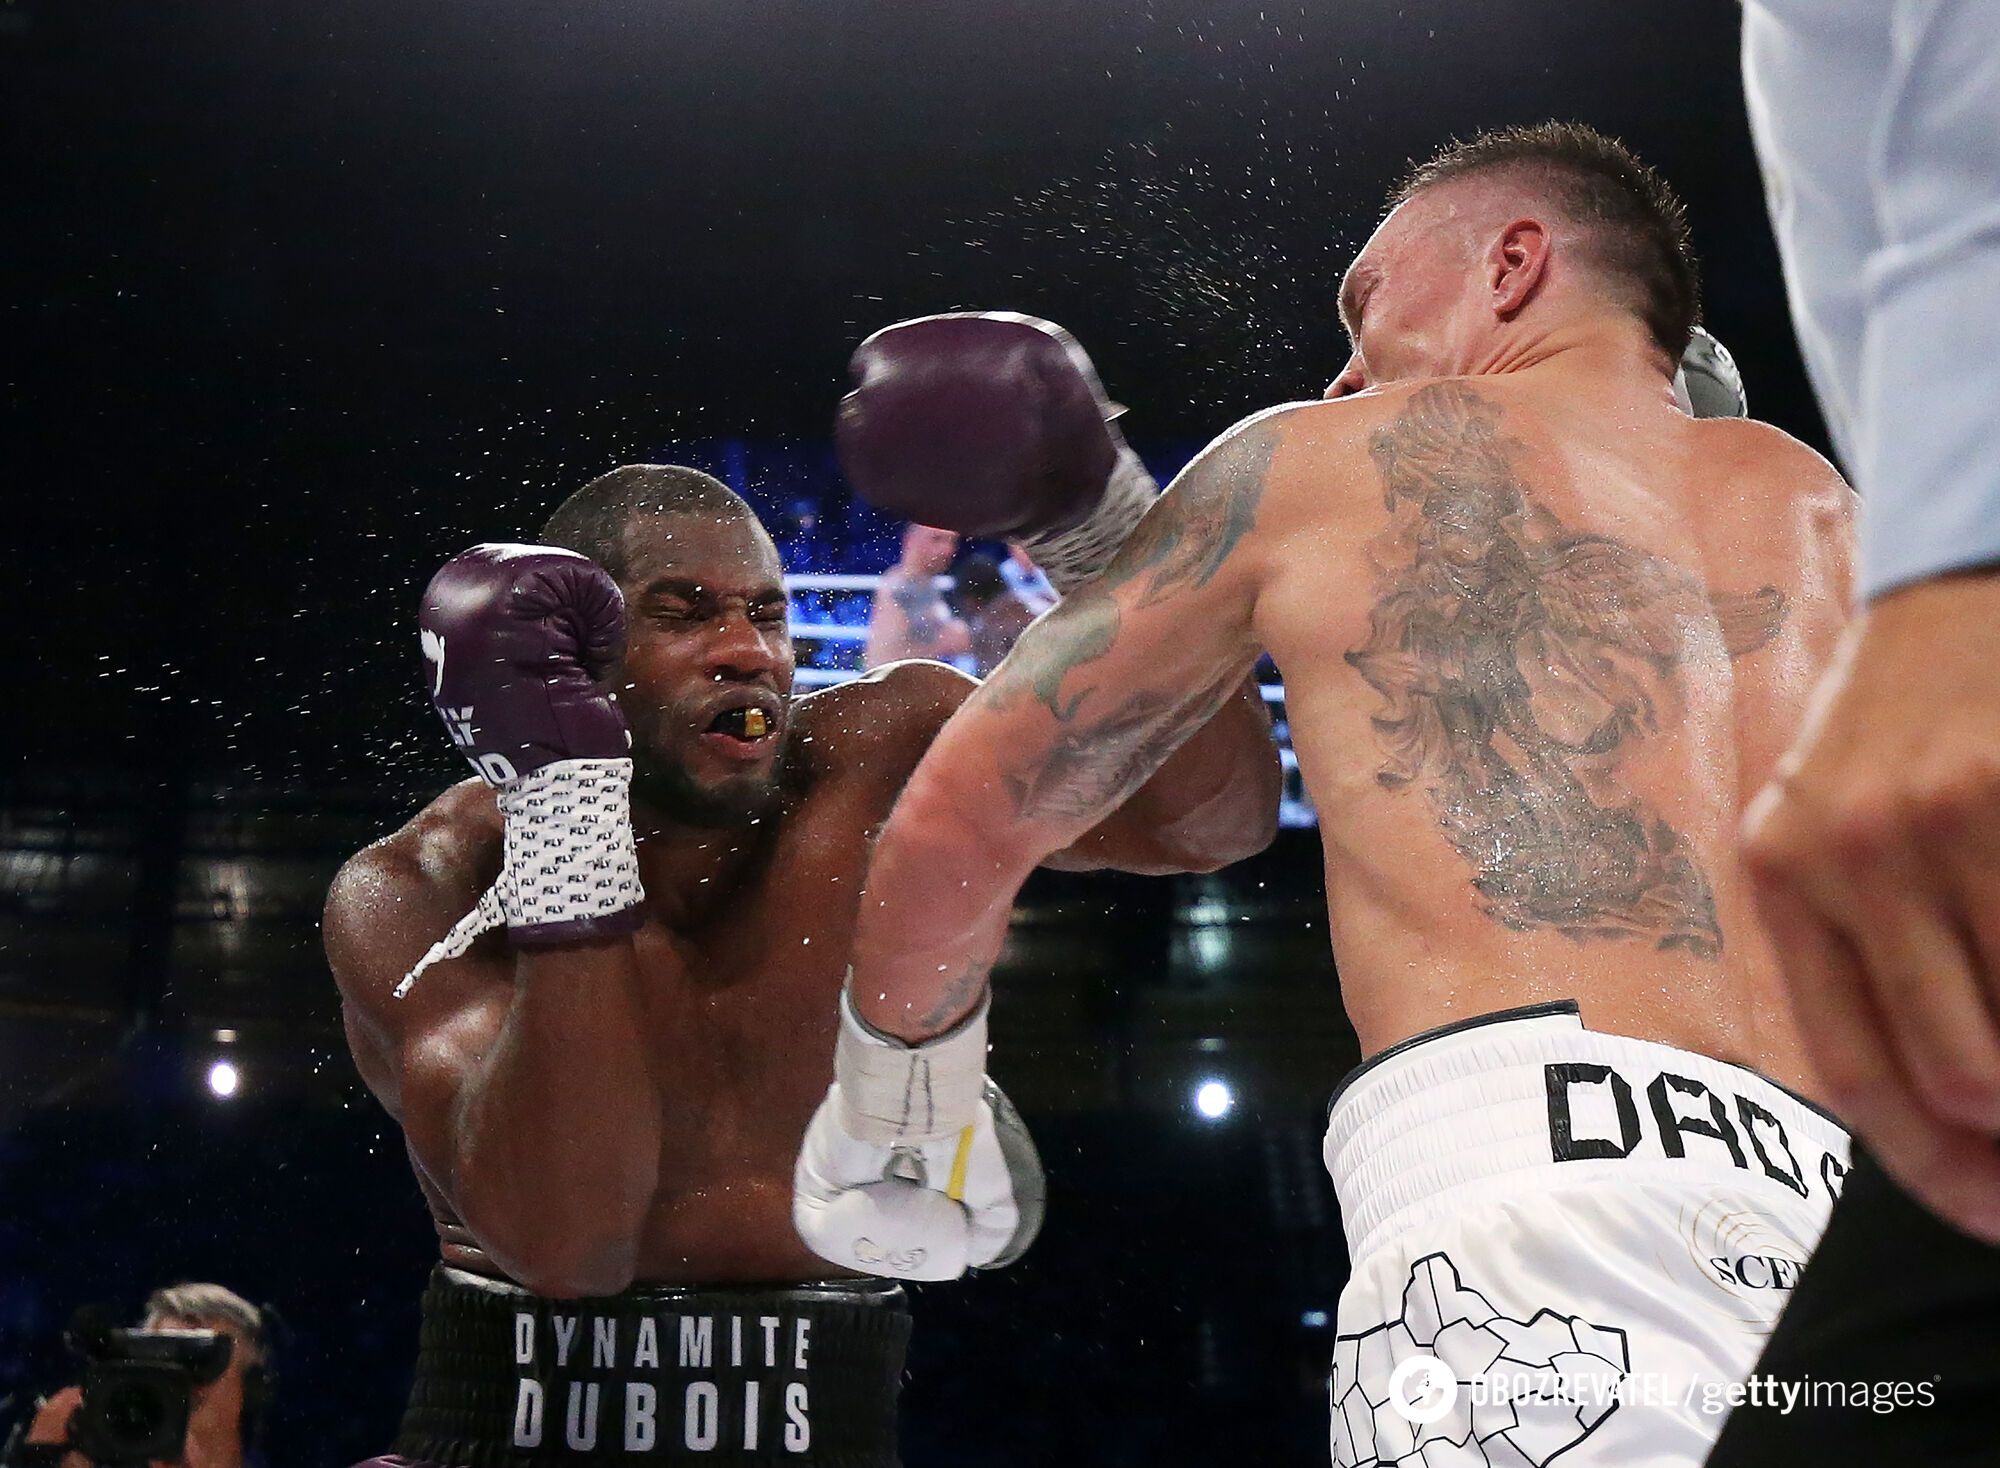 ''I can't believe it'': what happened in the fight between Usyk and Dubois was described as ''crazy''